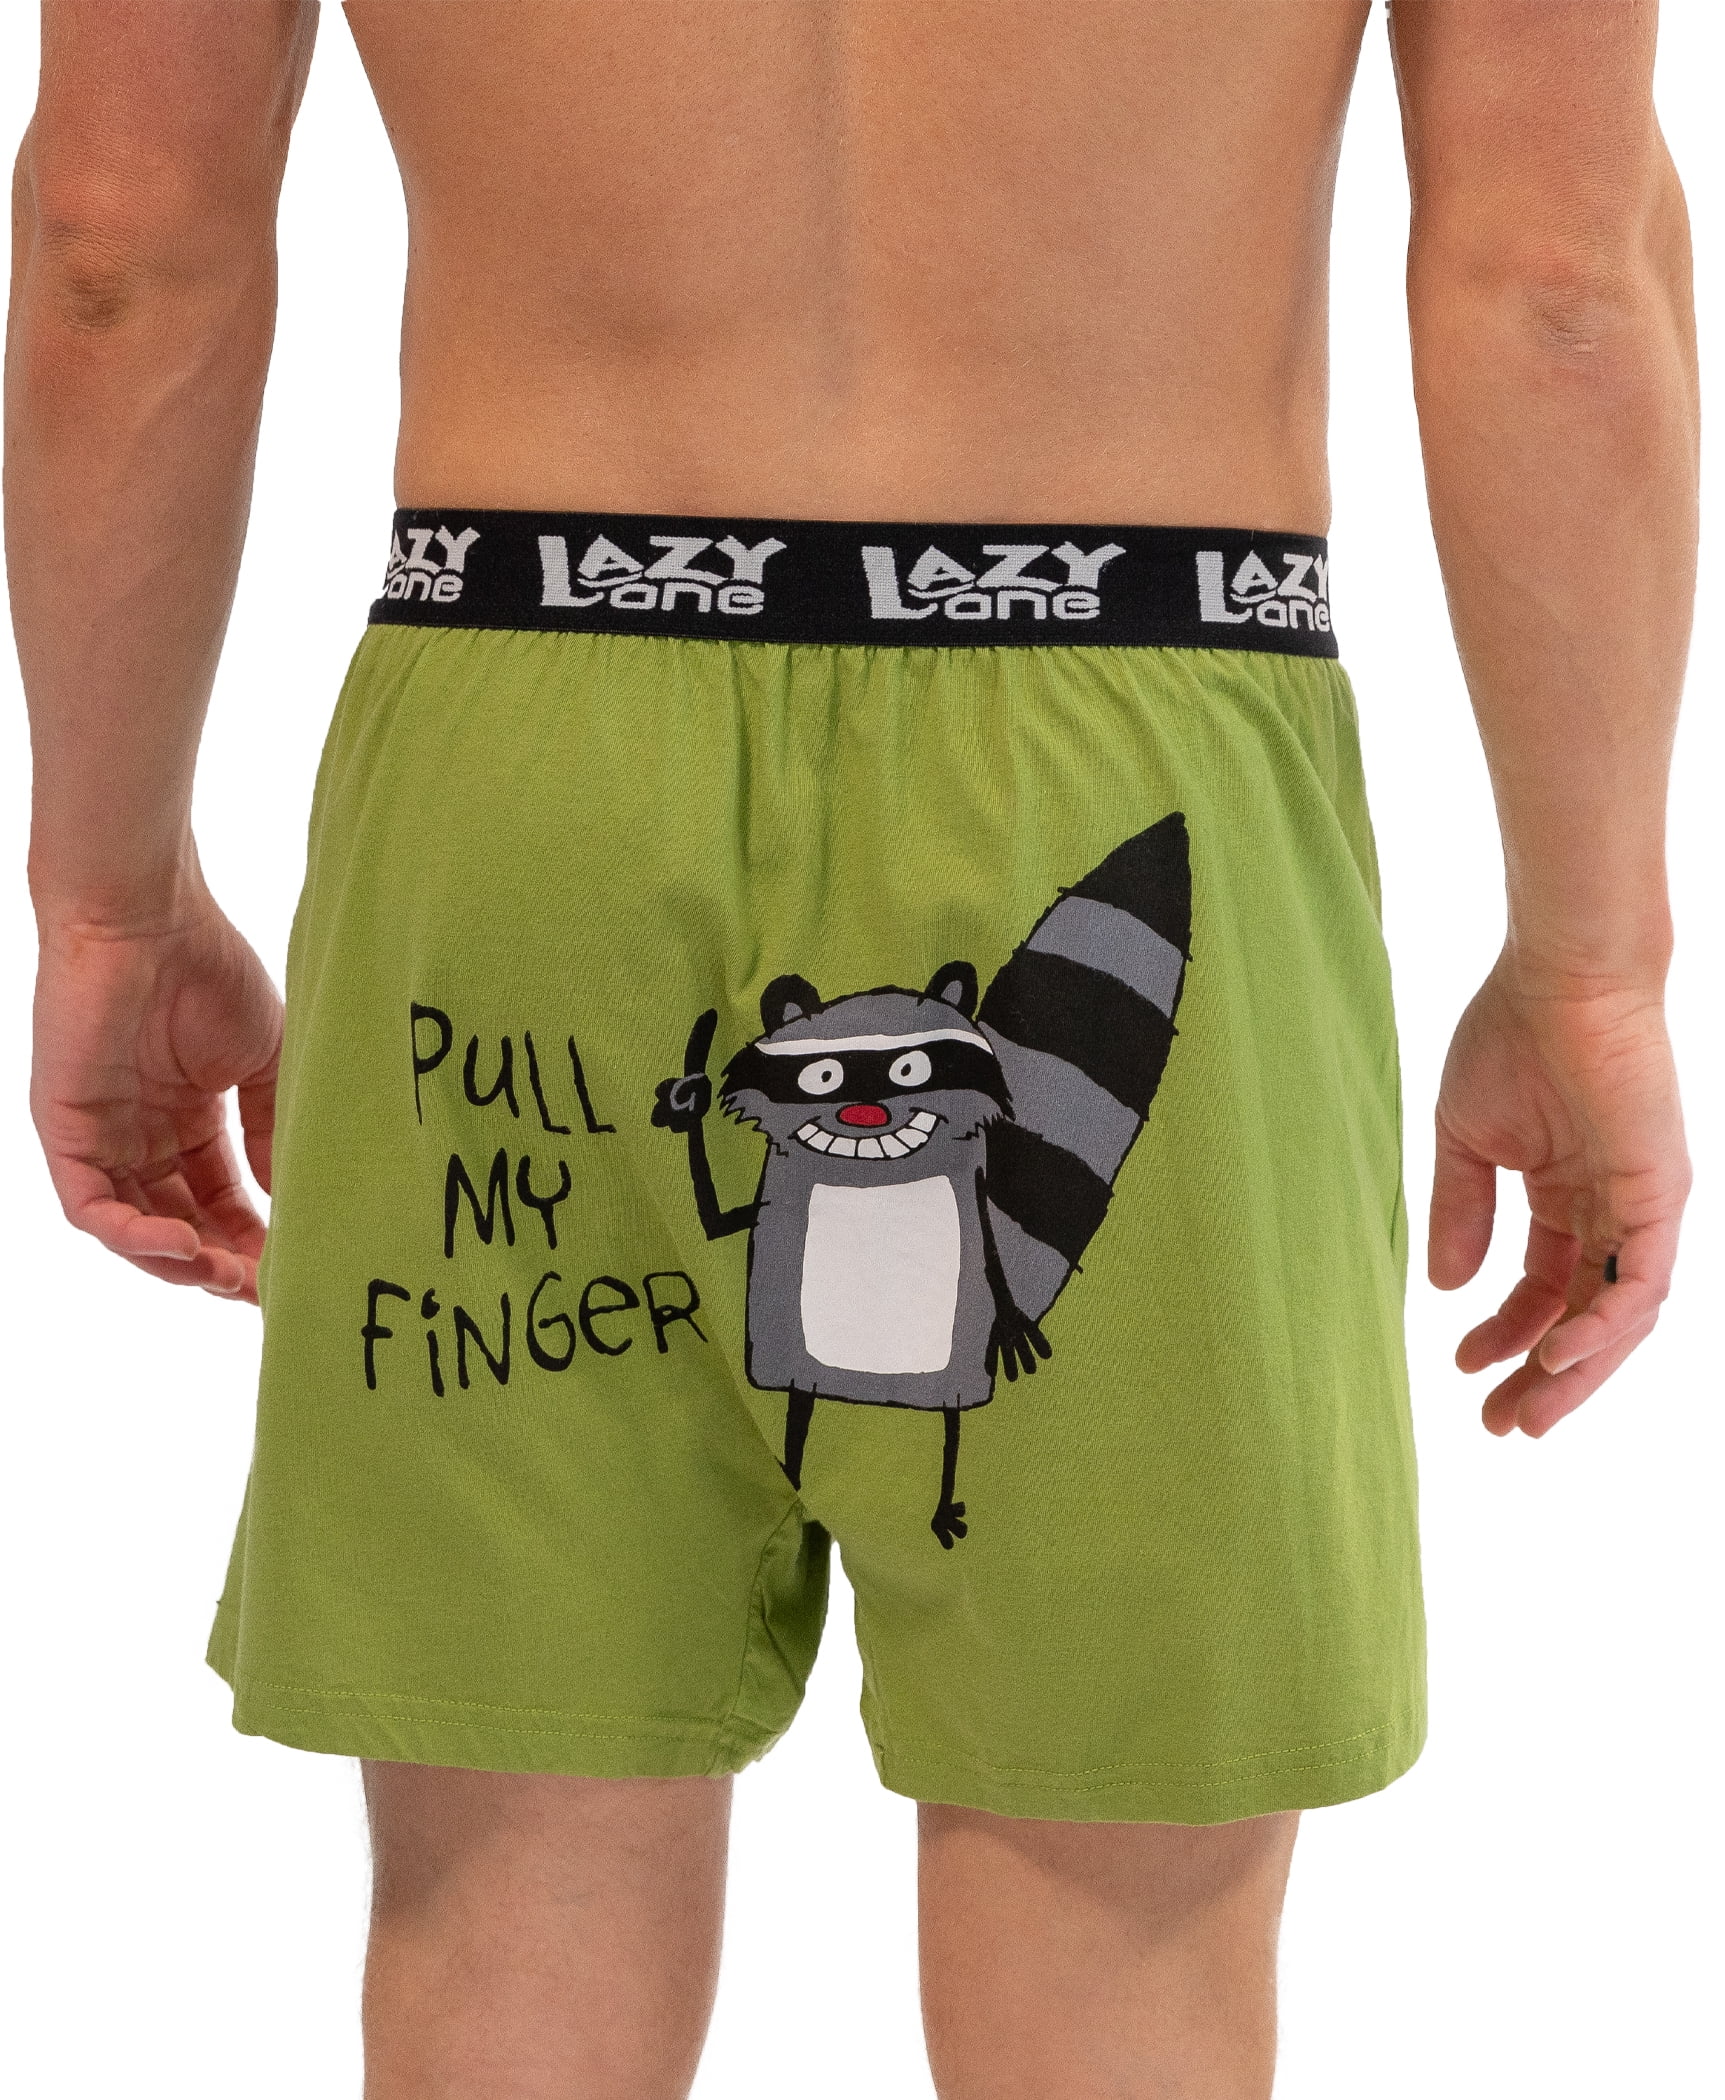 LazyOne Funny Animal Boxers, Humorous Underwear, Pull My Finger -  